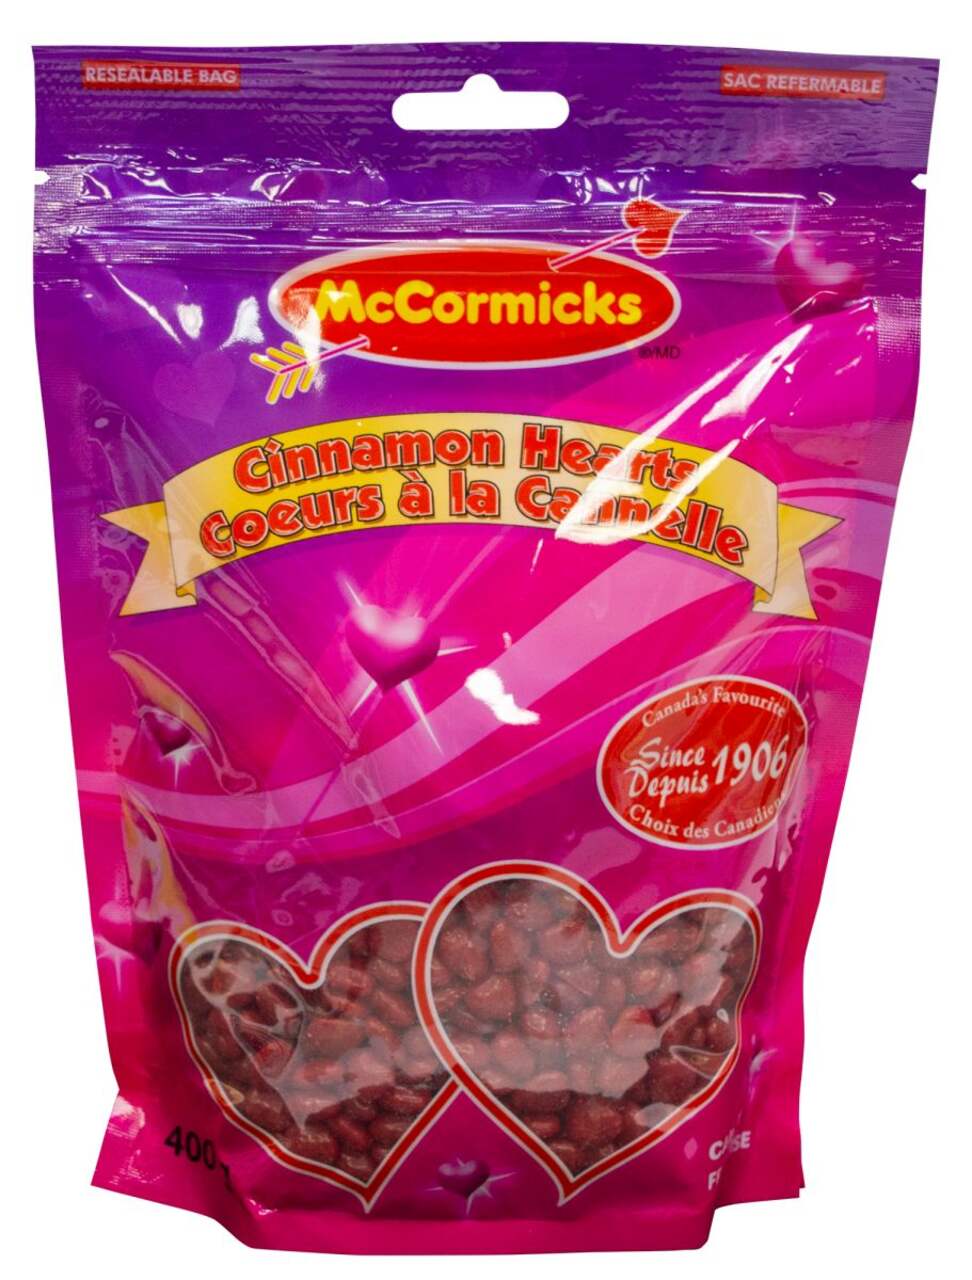 McCormick's Cinnamon Hearts  Valentine's Day Candy – Candy